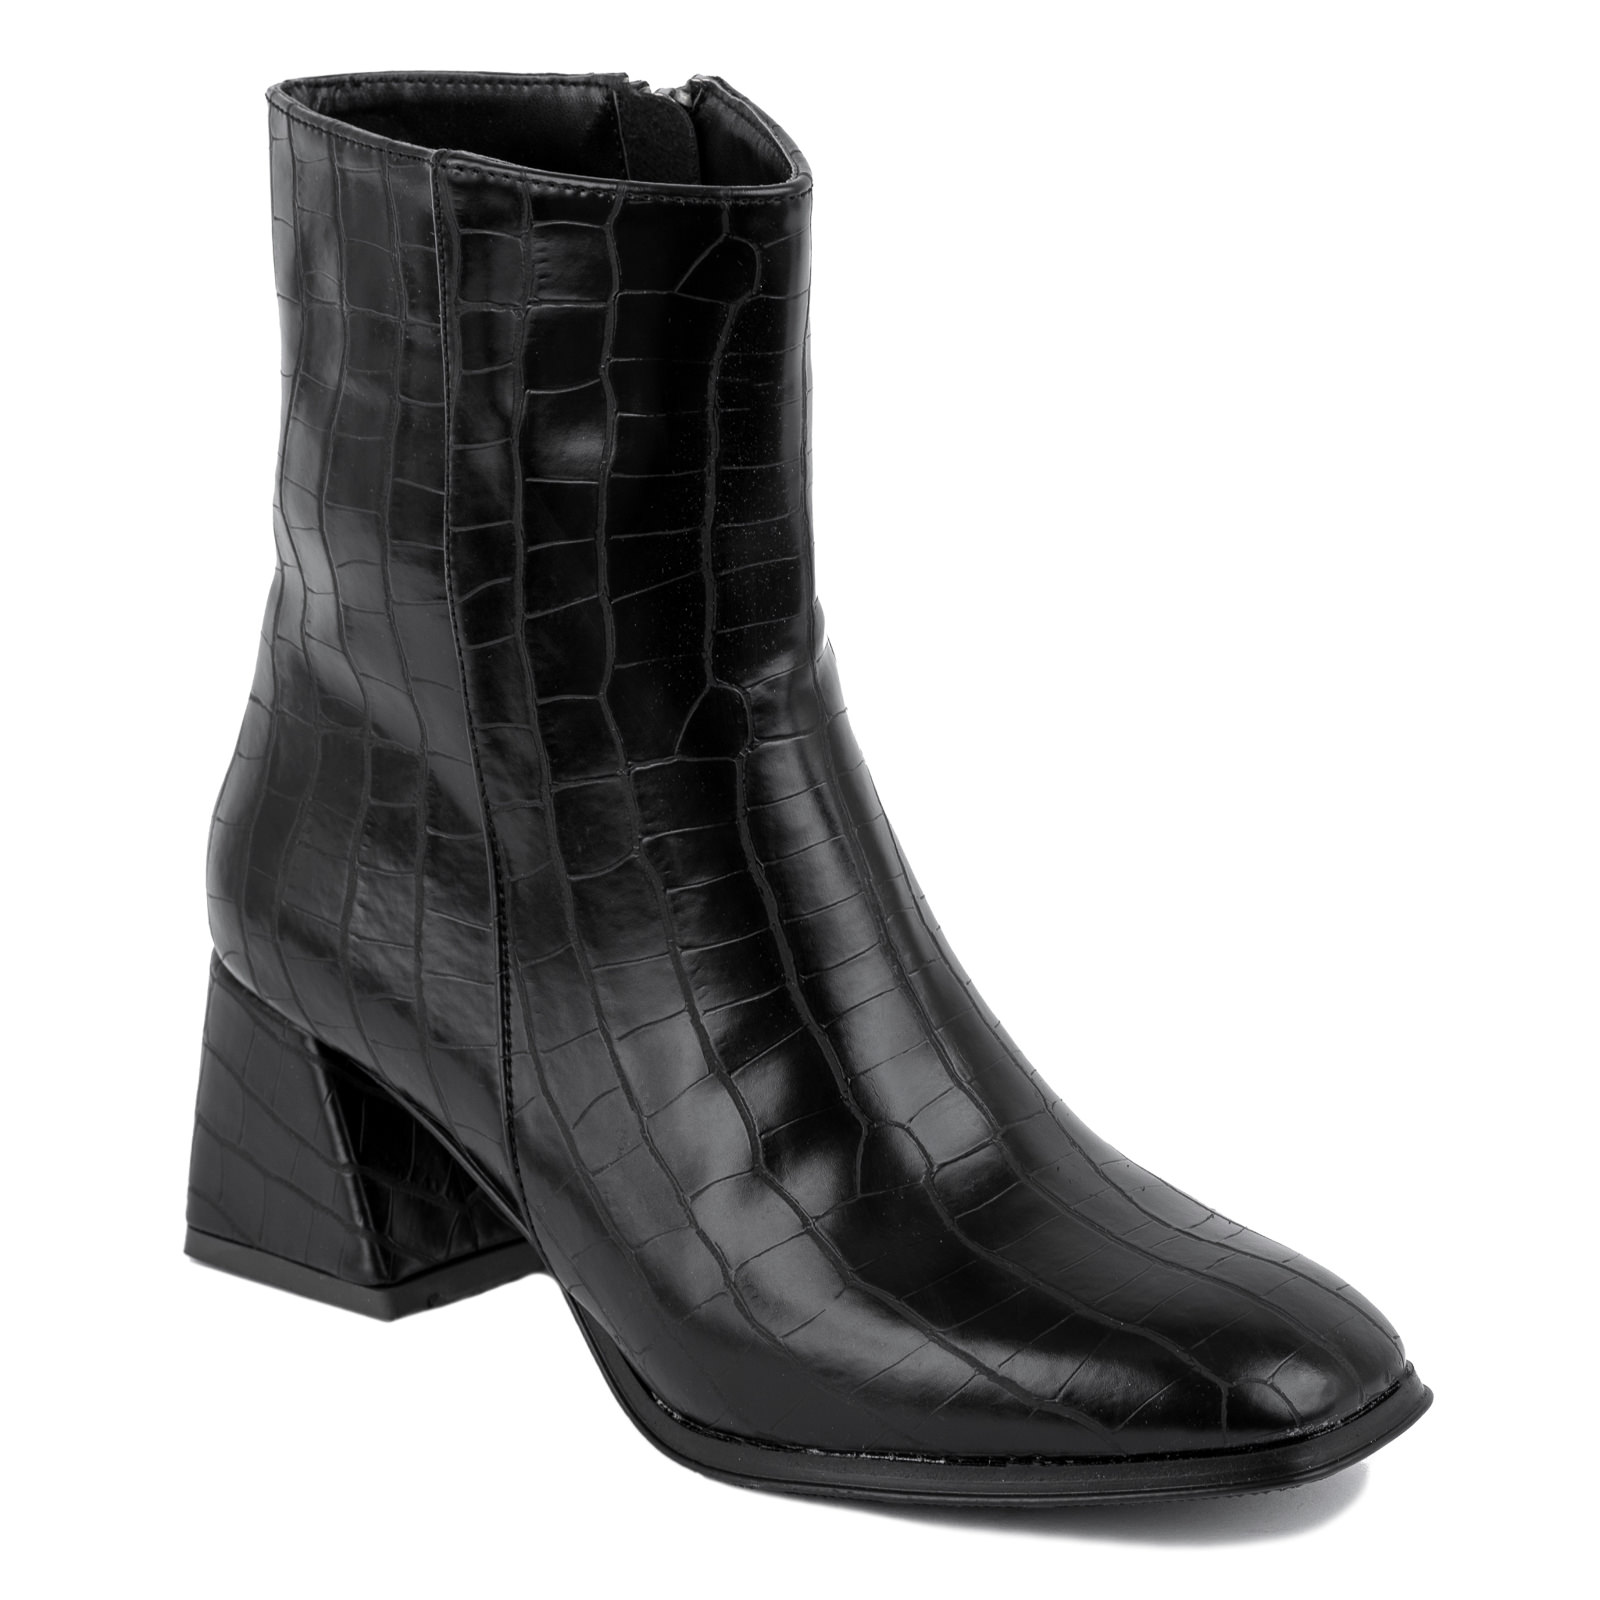 CROC ANKLE BOOTS WITH BLOCK HEEL - BLACK